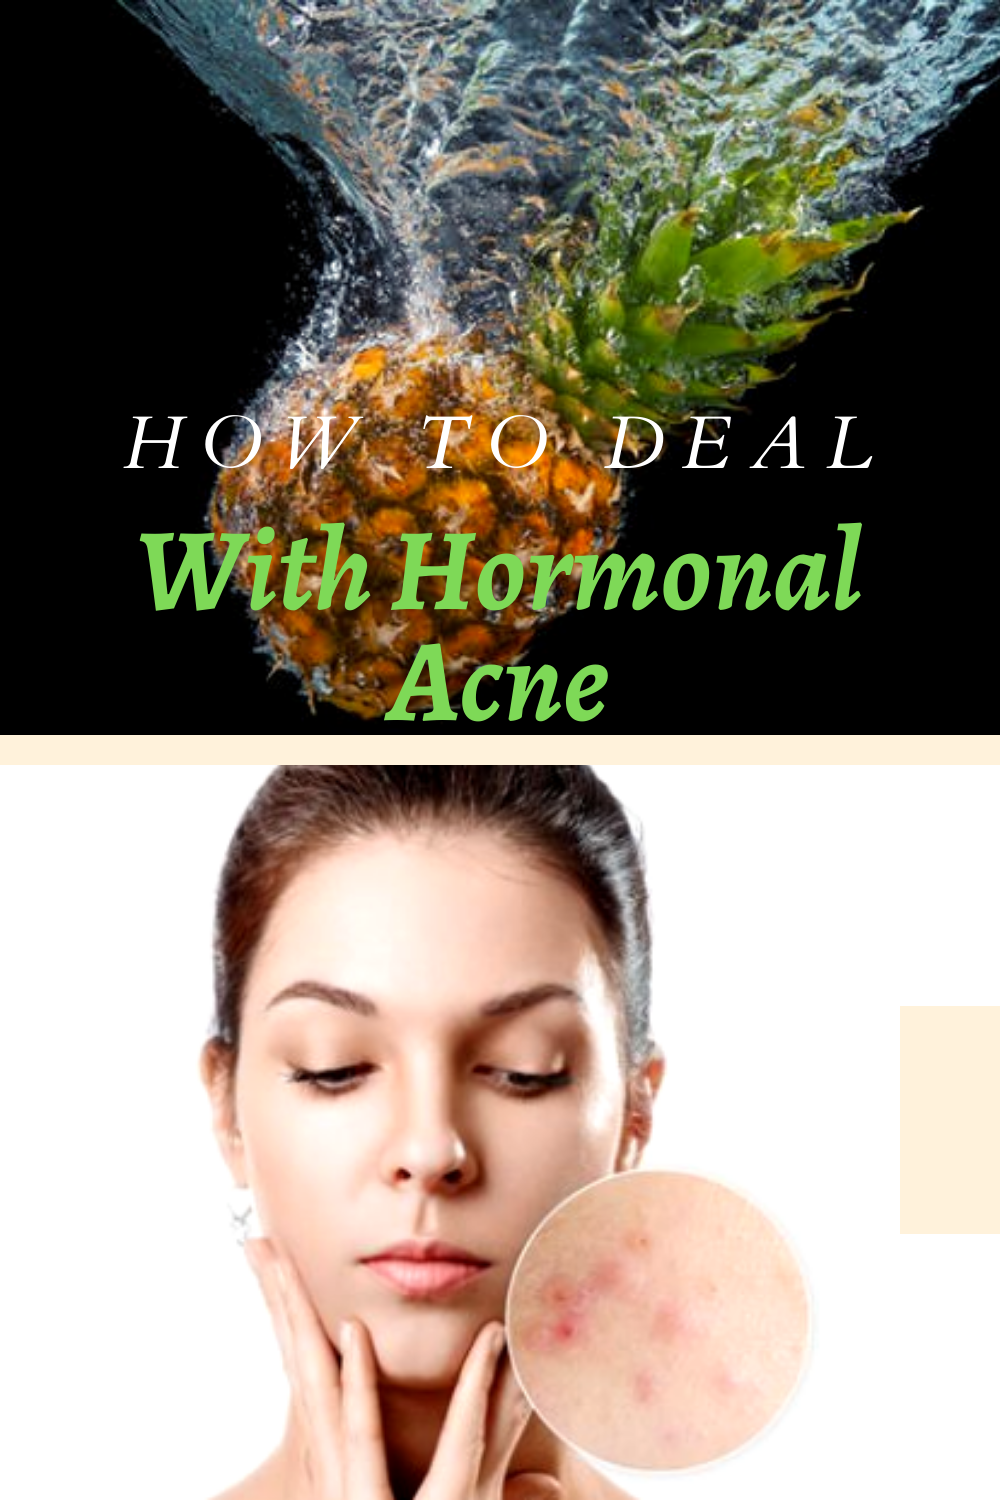 HOW TO DEAL WITH HORMONAL ACNE